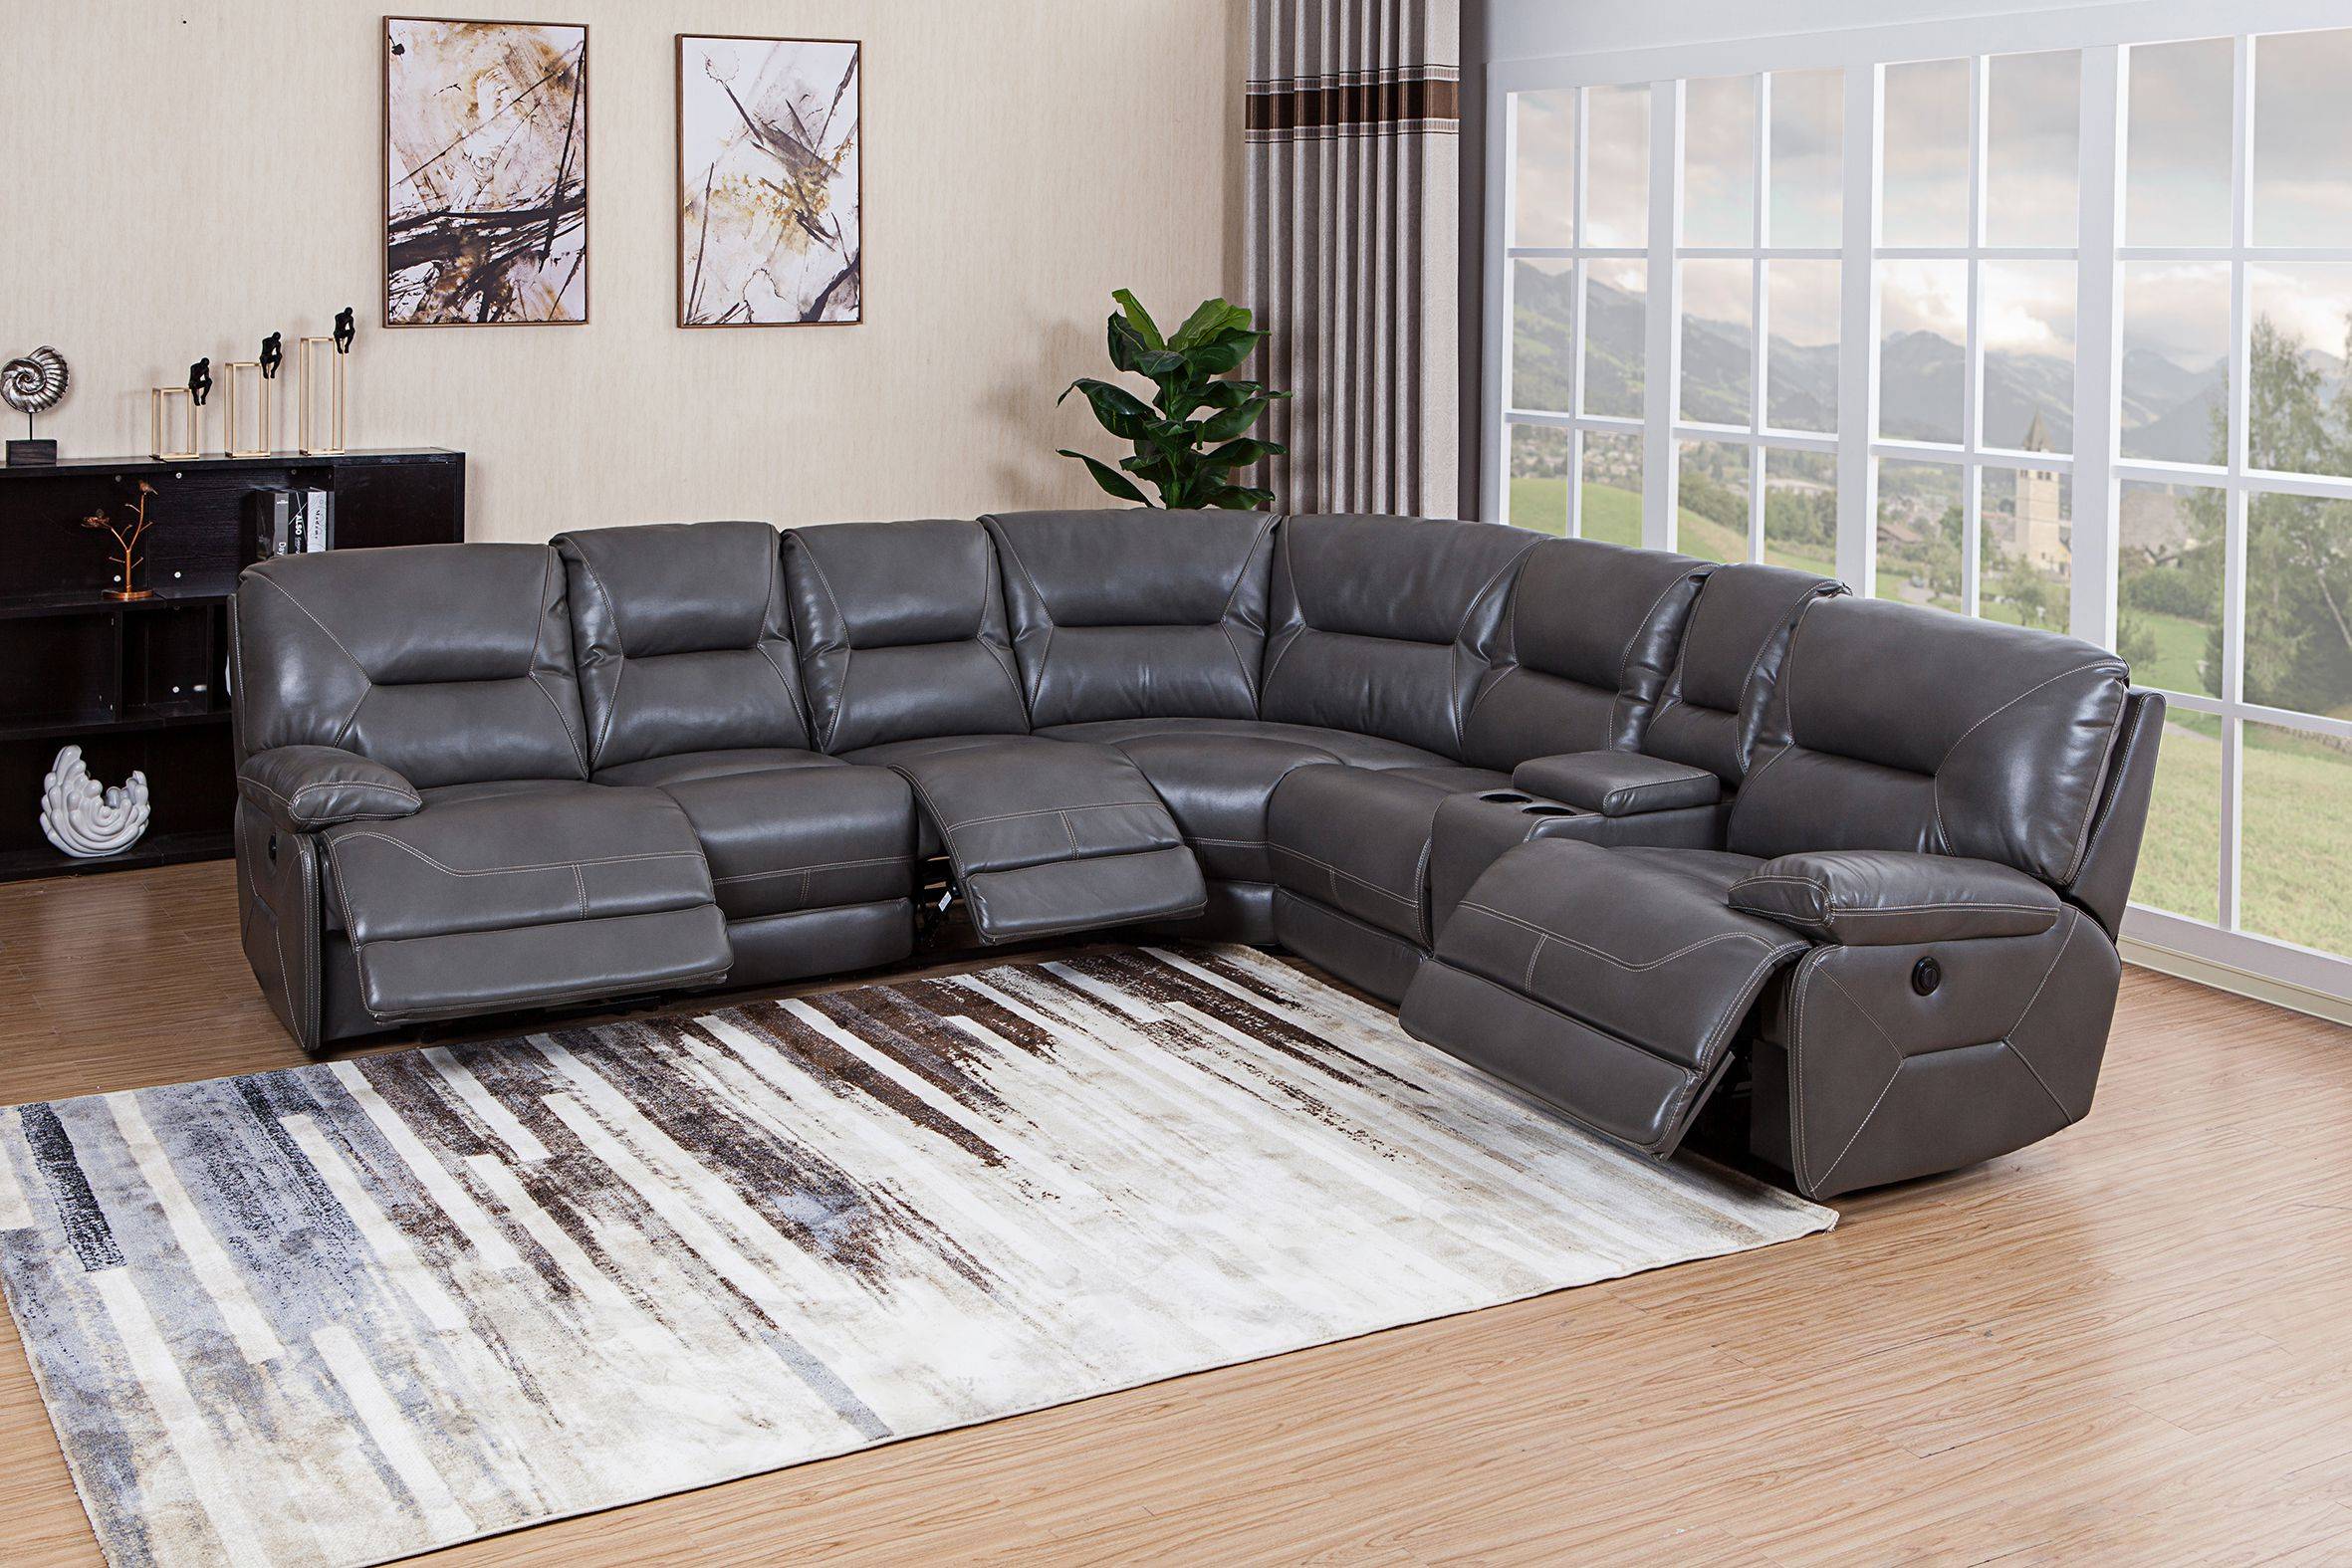 2019 new design indoor luxury leather electric recliner sectional sofa